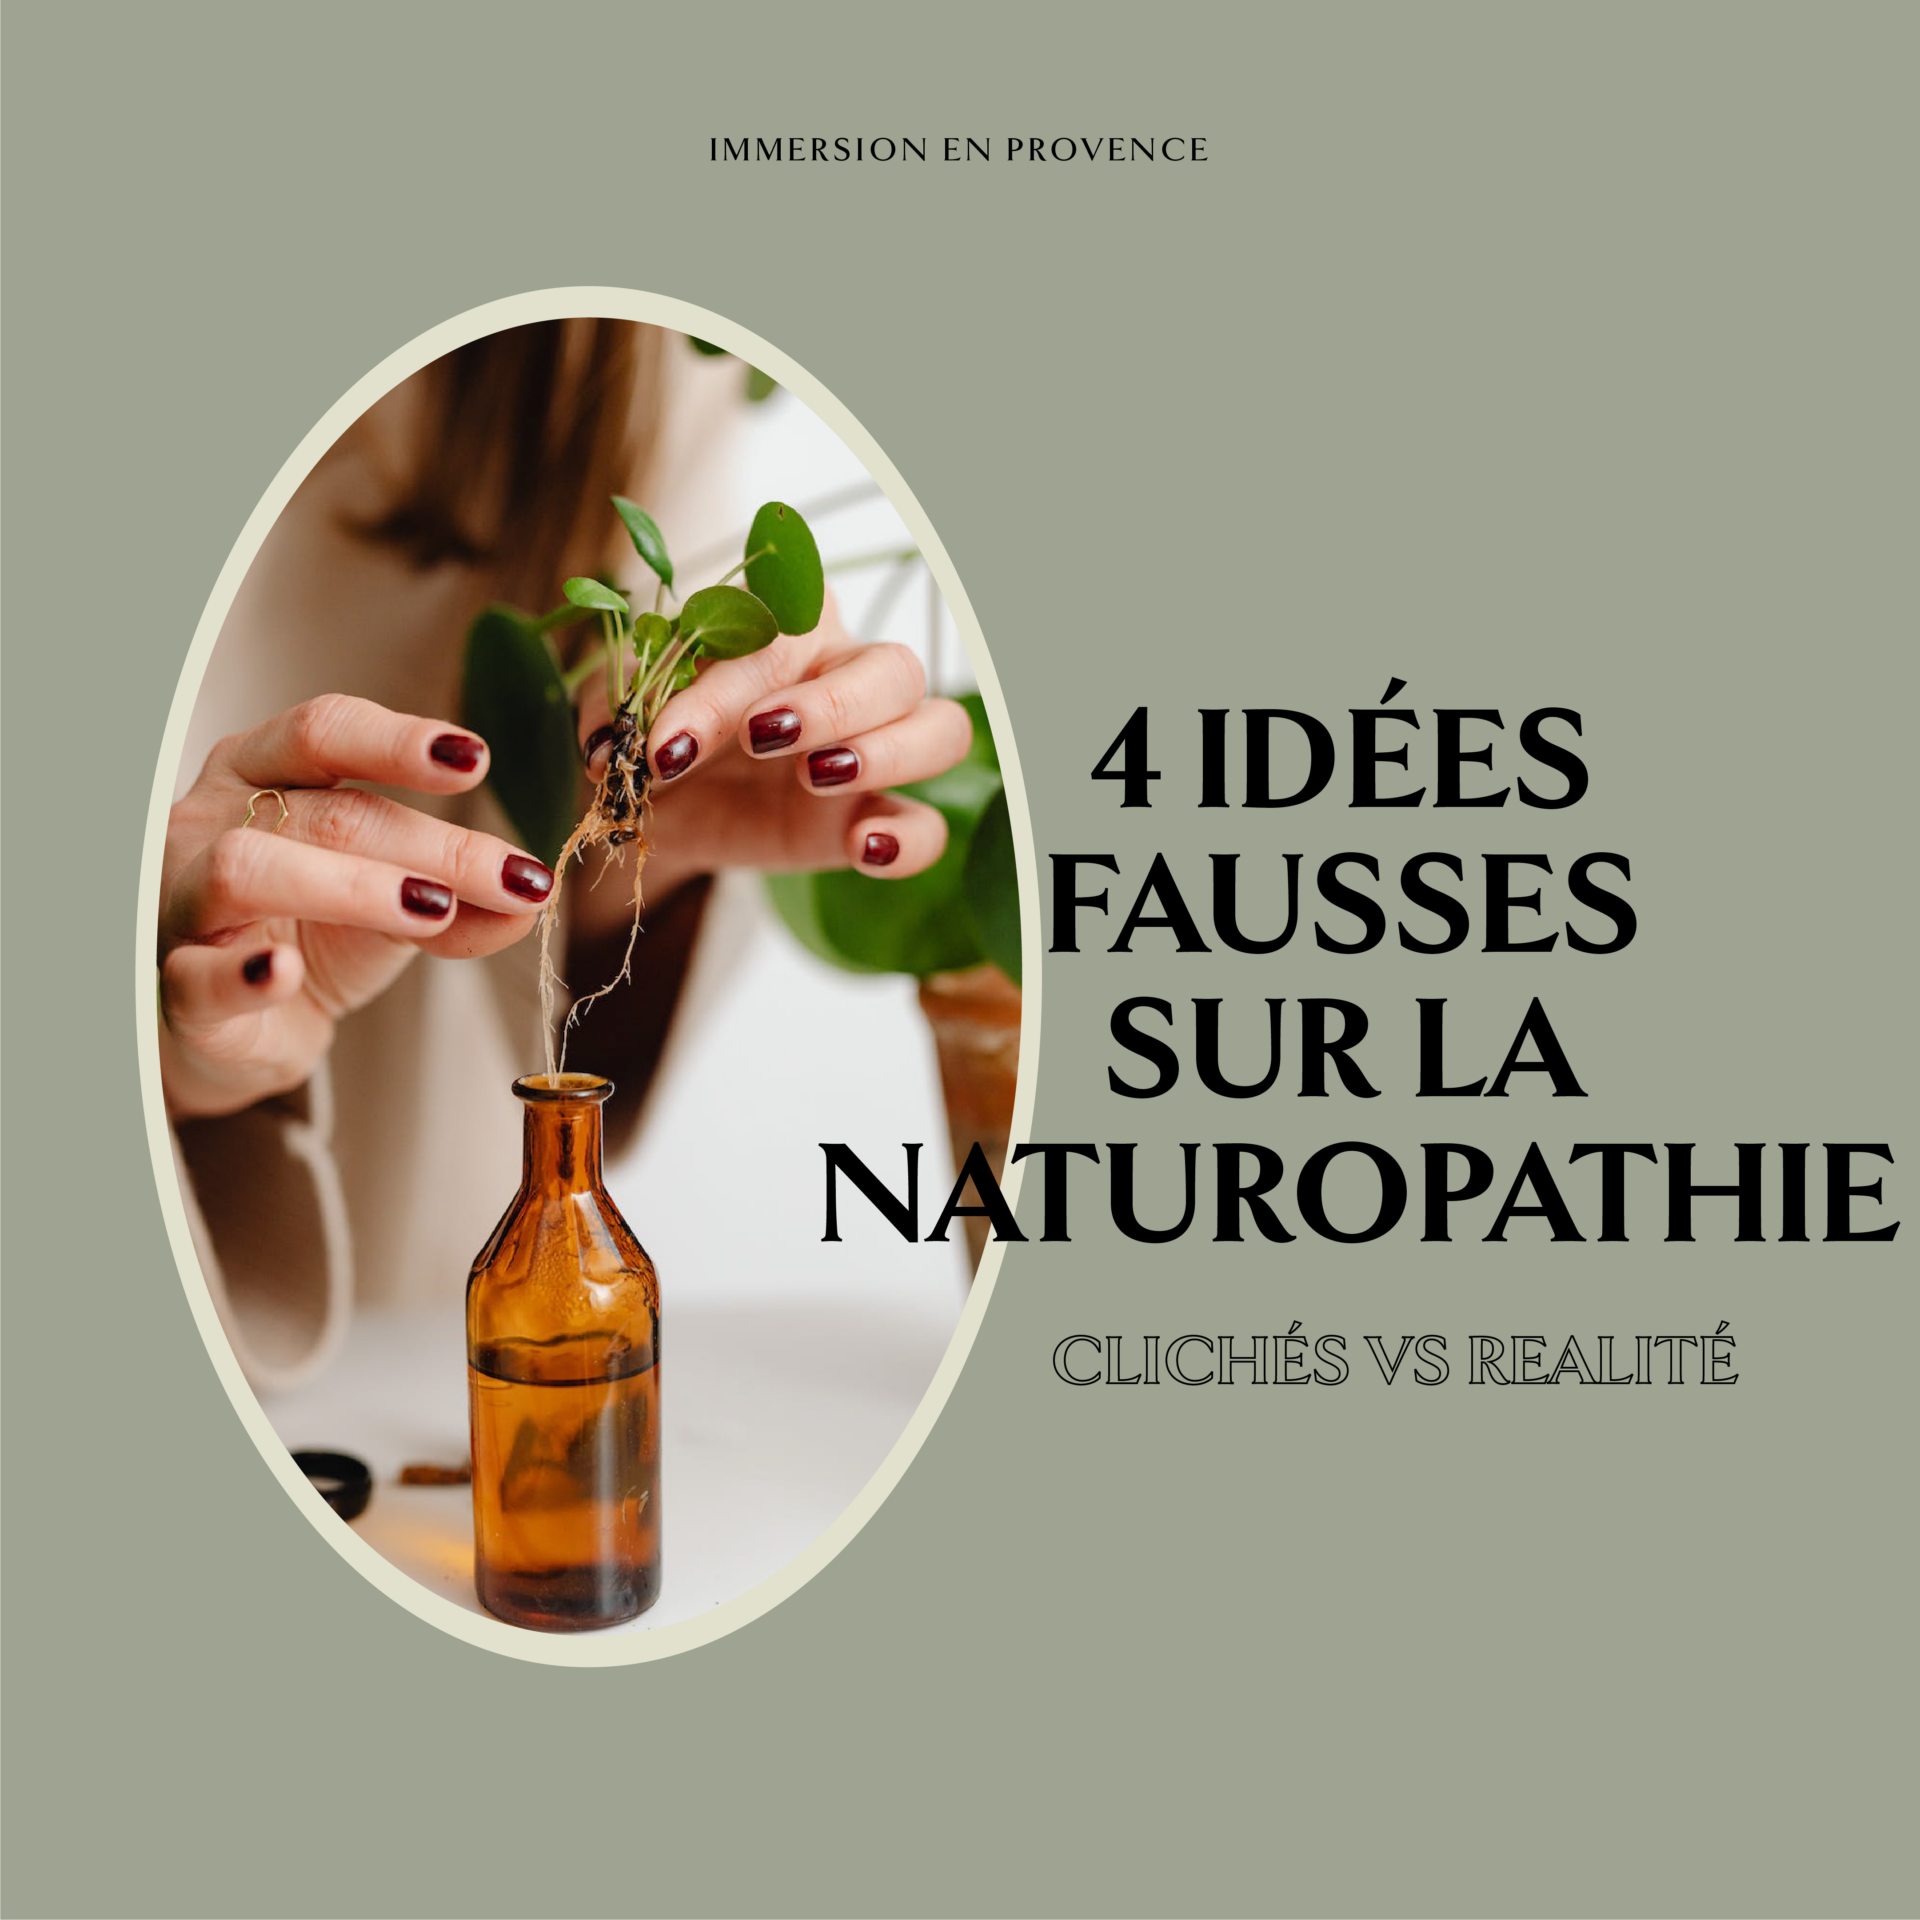 You are currently viewing 4 idées fausses sur la naturopathie